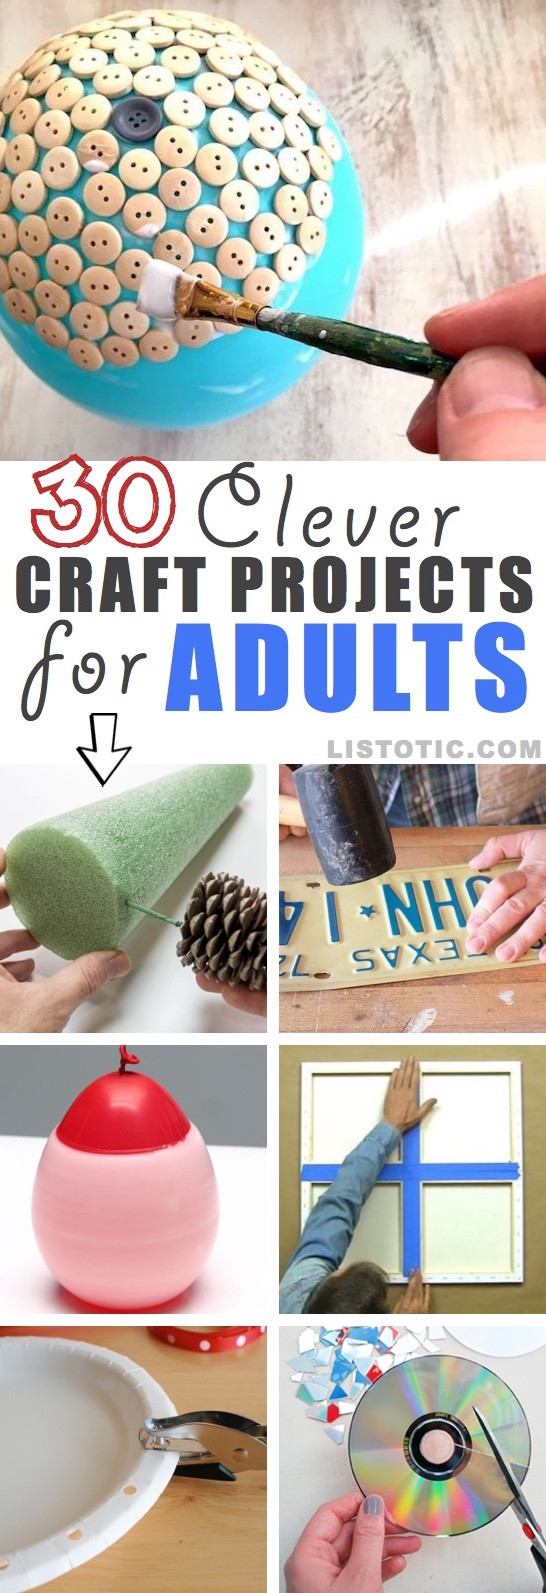 DIY Gifts For Adults
 Easy DIY Craft Ideas That Will Spark Your Creativity for